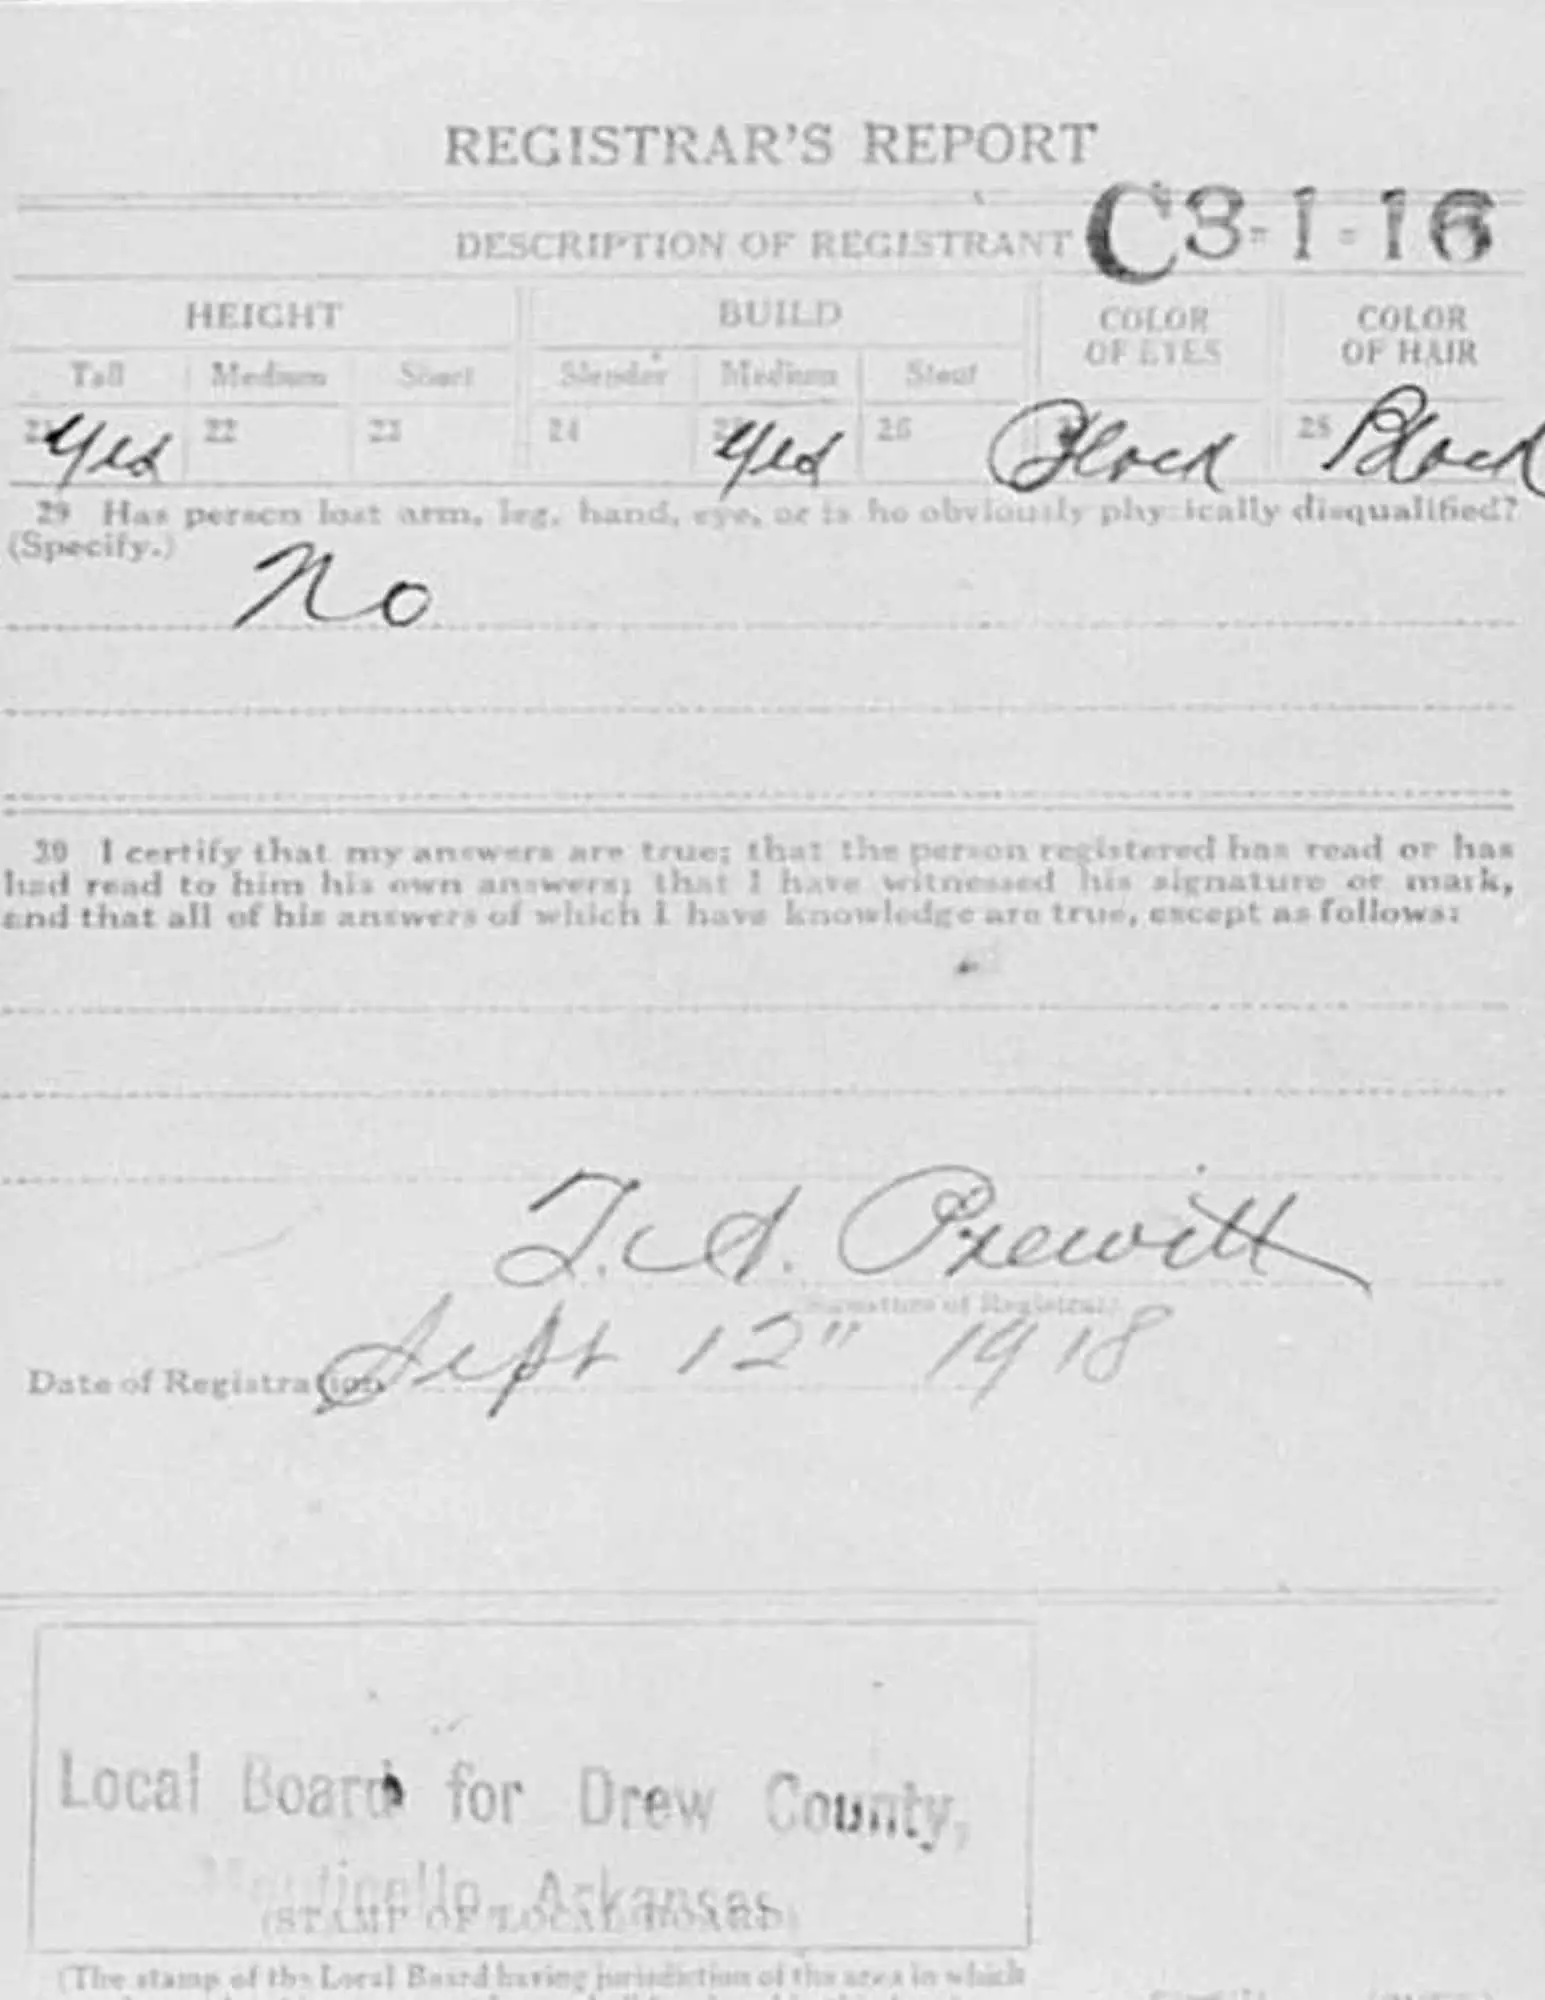 A draft card for my great uncle, Devan Creal, was used in my article, "The Life Story Of My Great Uncle, Devan Creal."